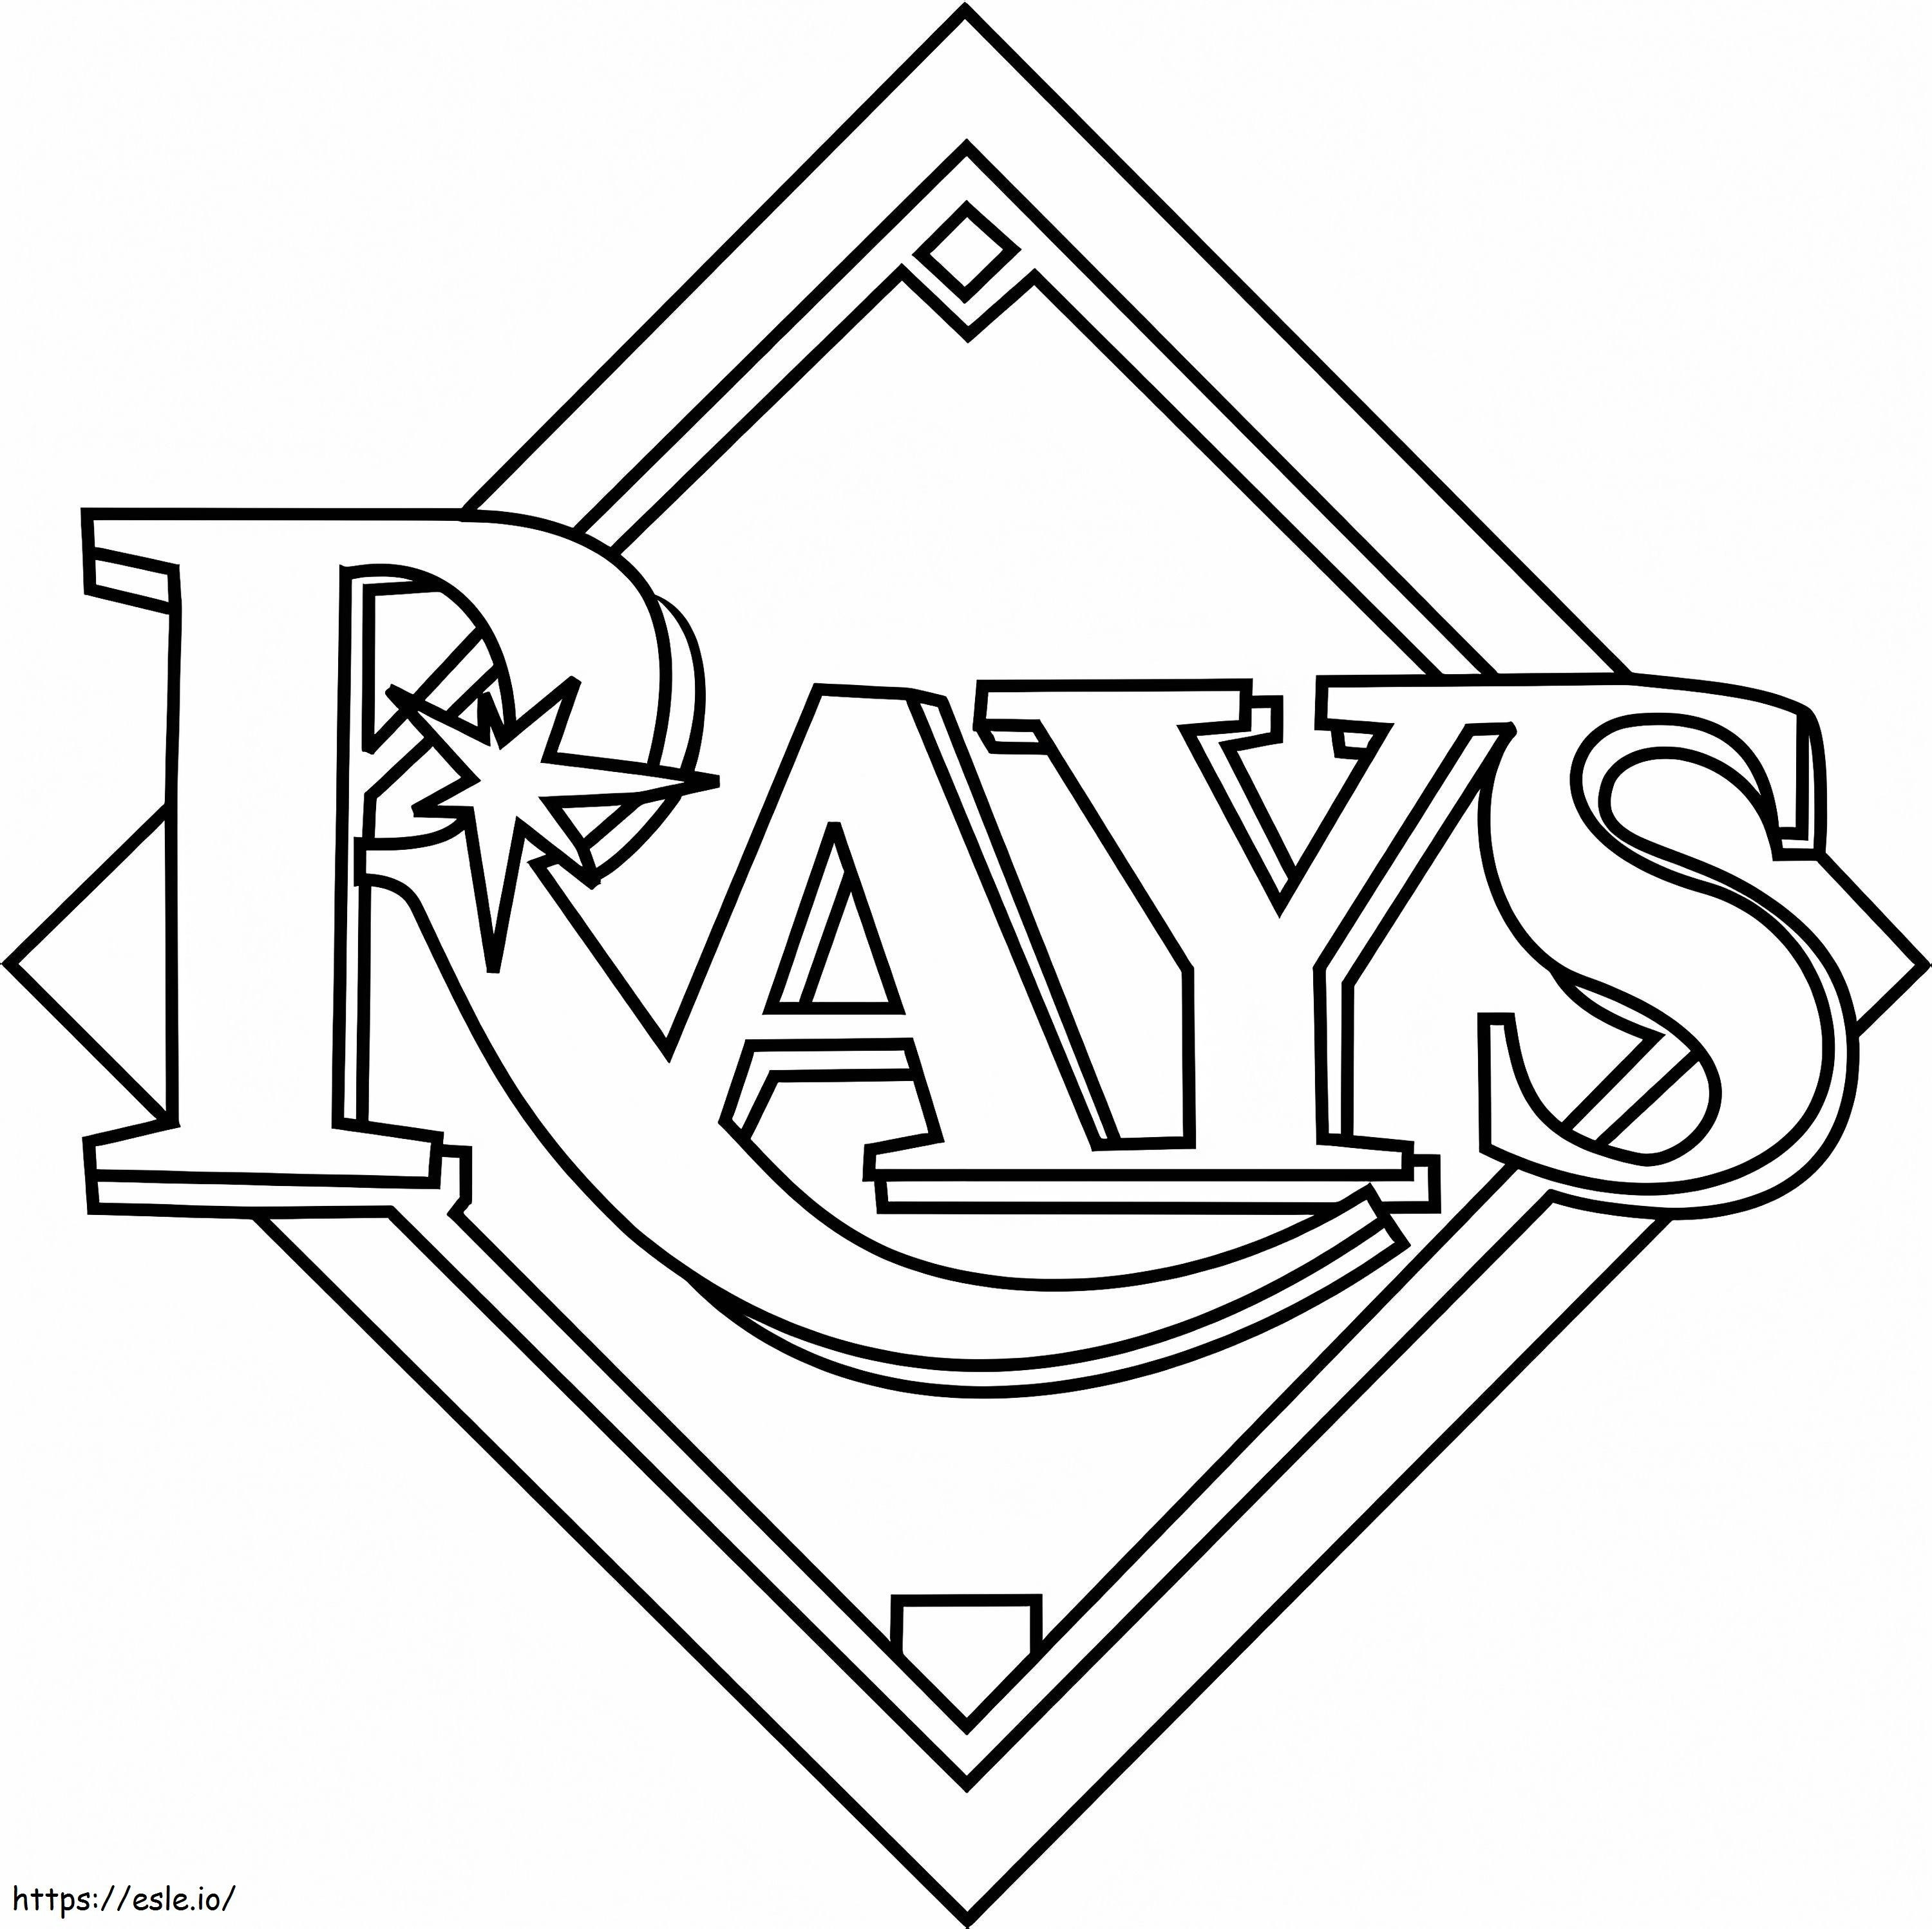 Tampa Bay Rays Logo coloring page